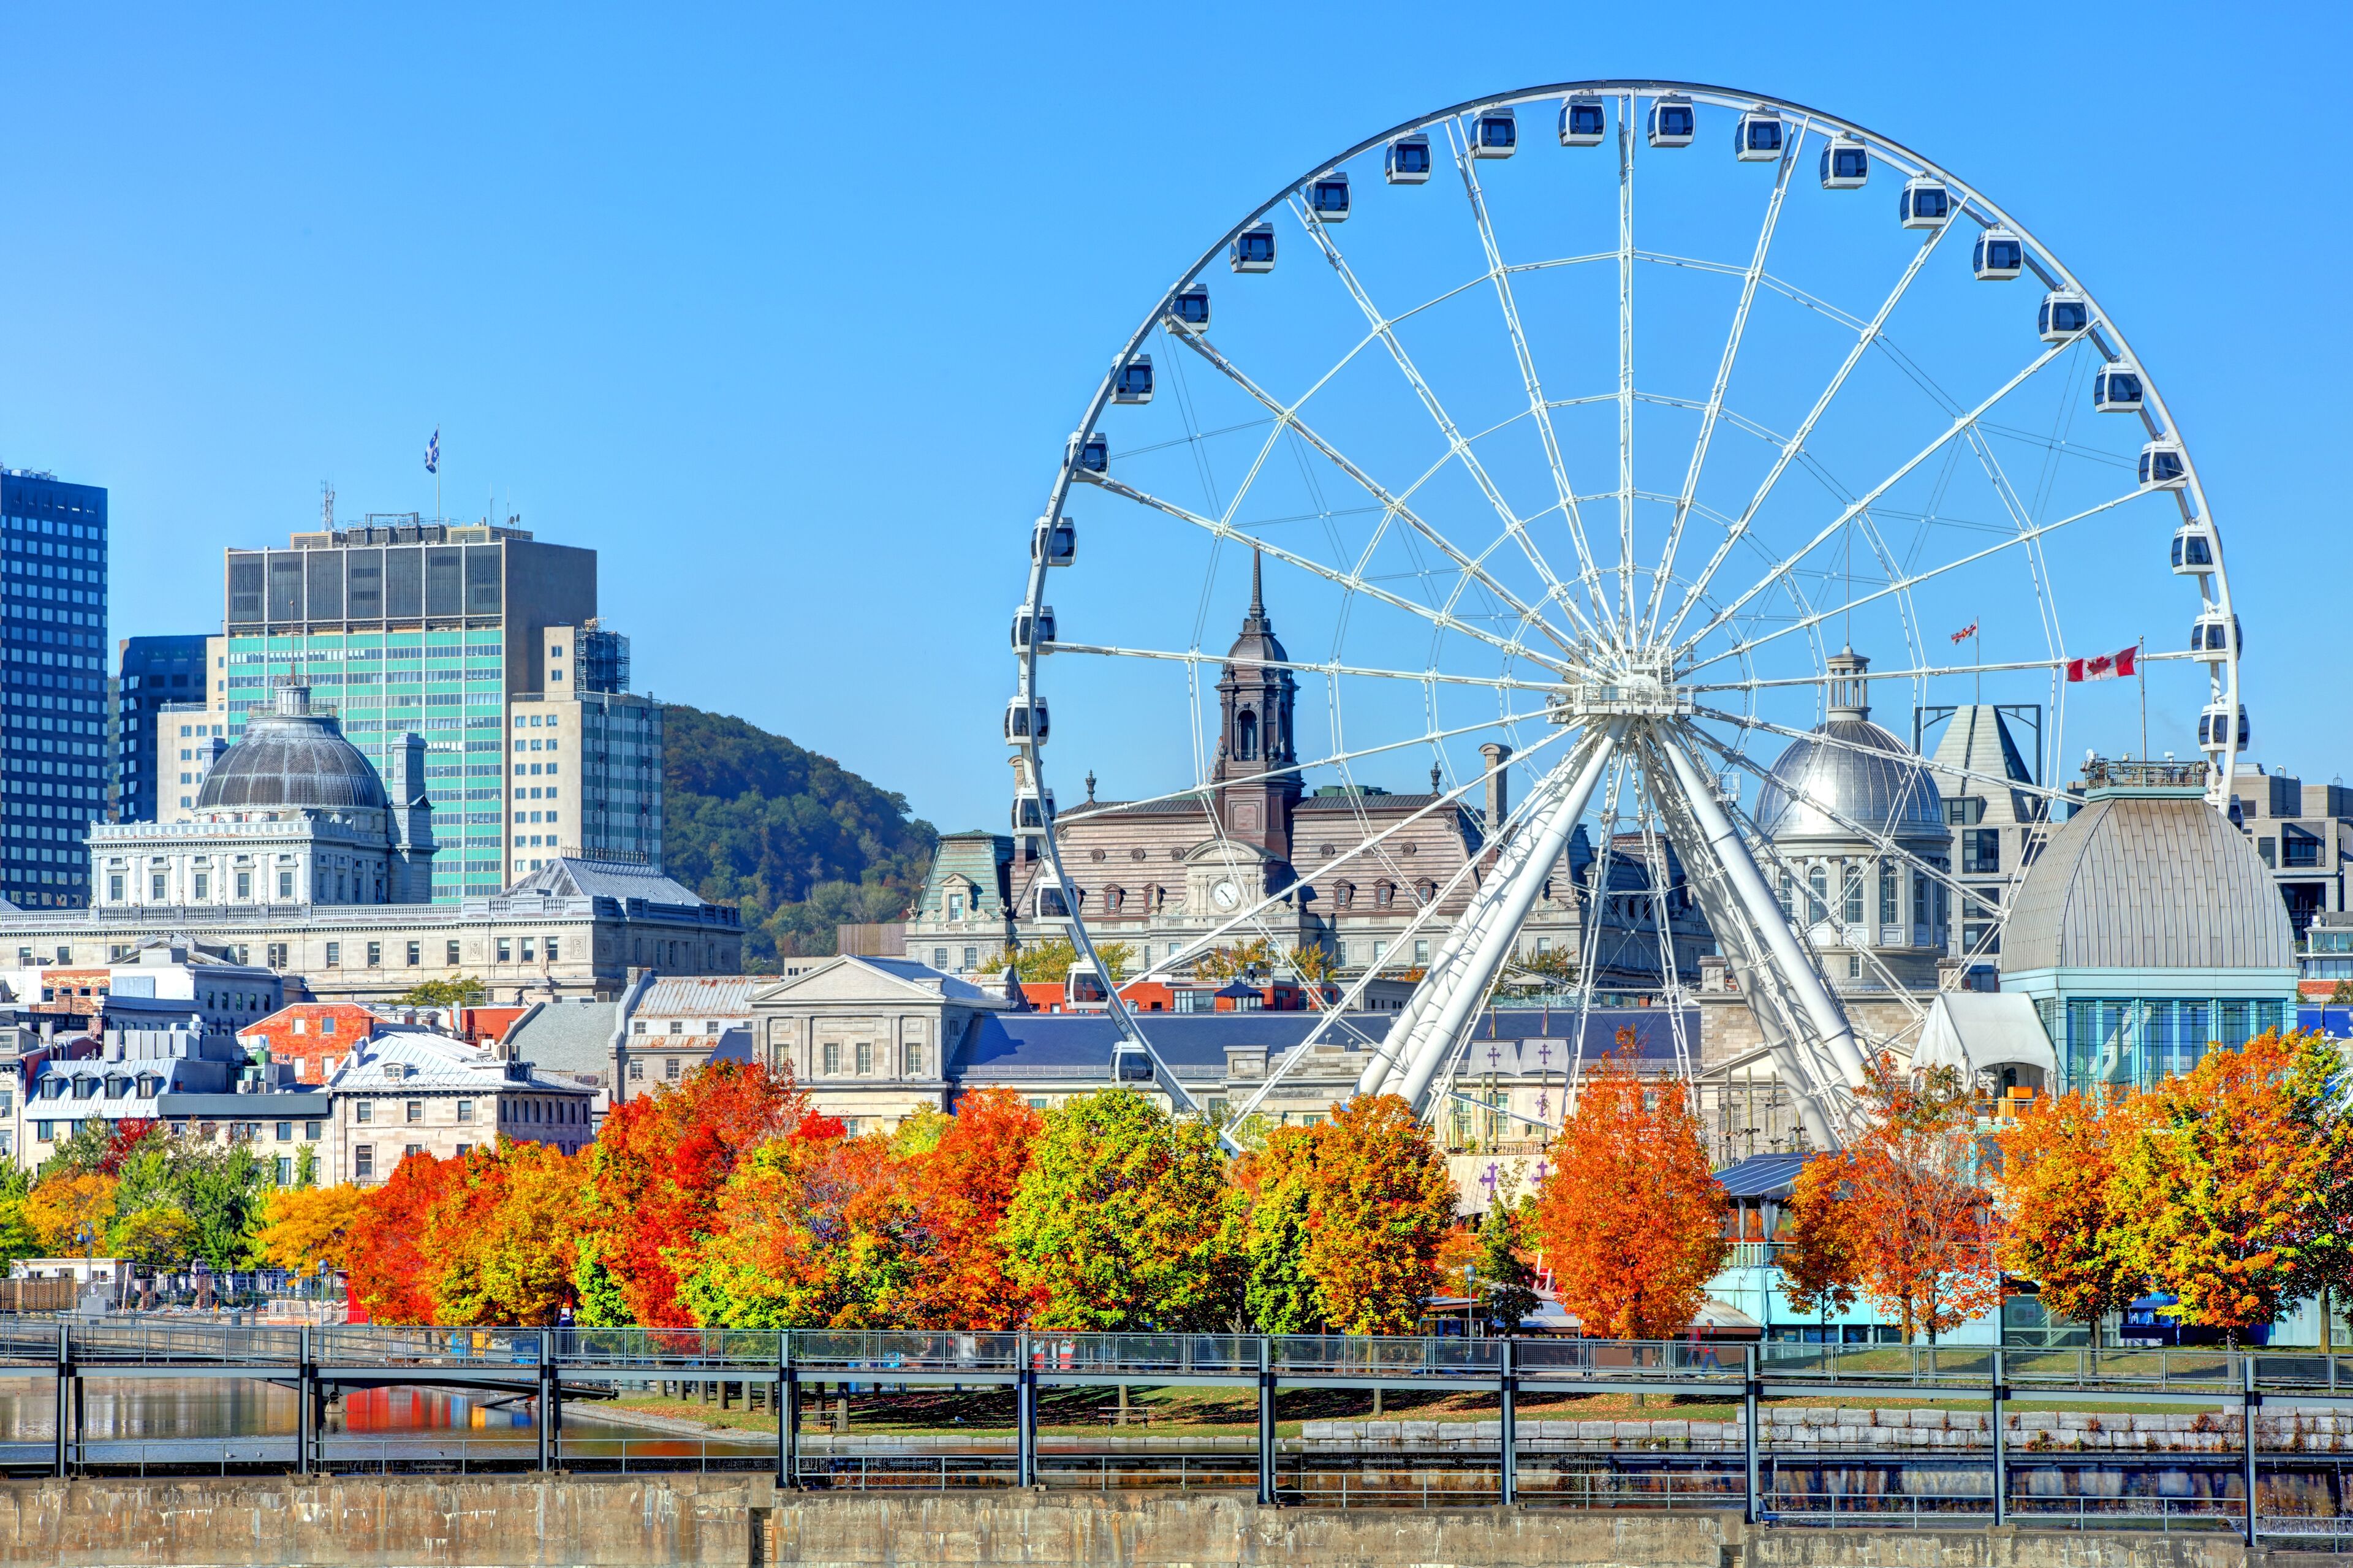 The vibrant colors of autumn frame the iconic Ferris wheel in Montreal's Old Port, offering a picturesque view against the city's historic architecture.